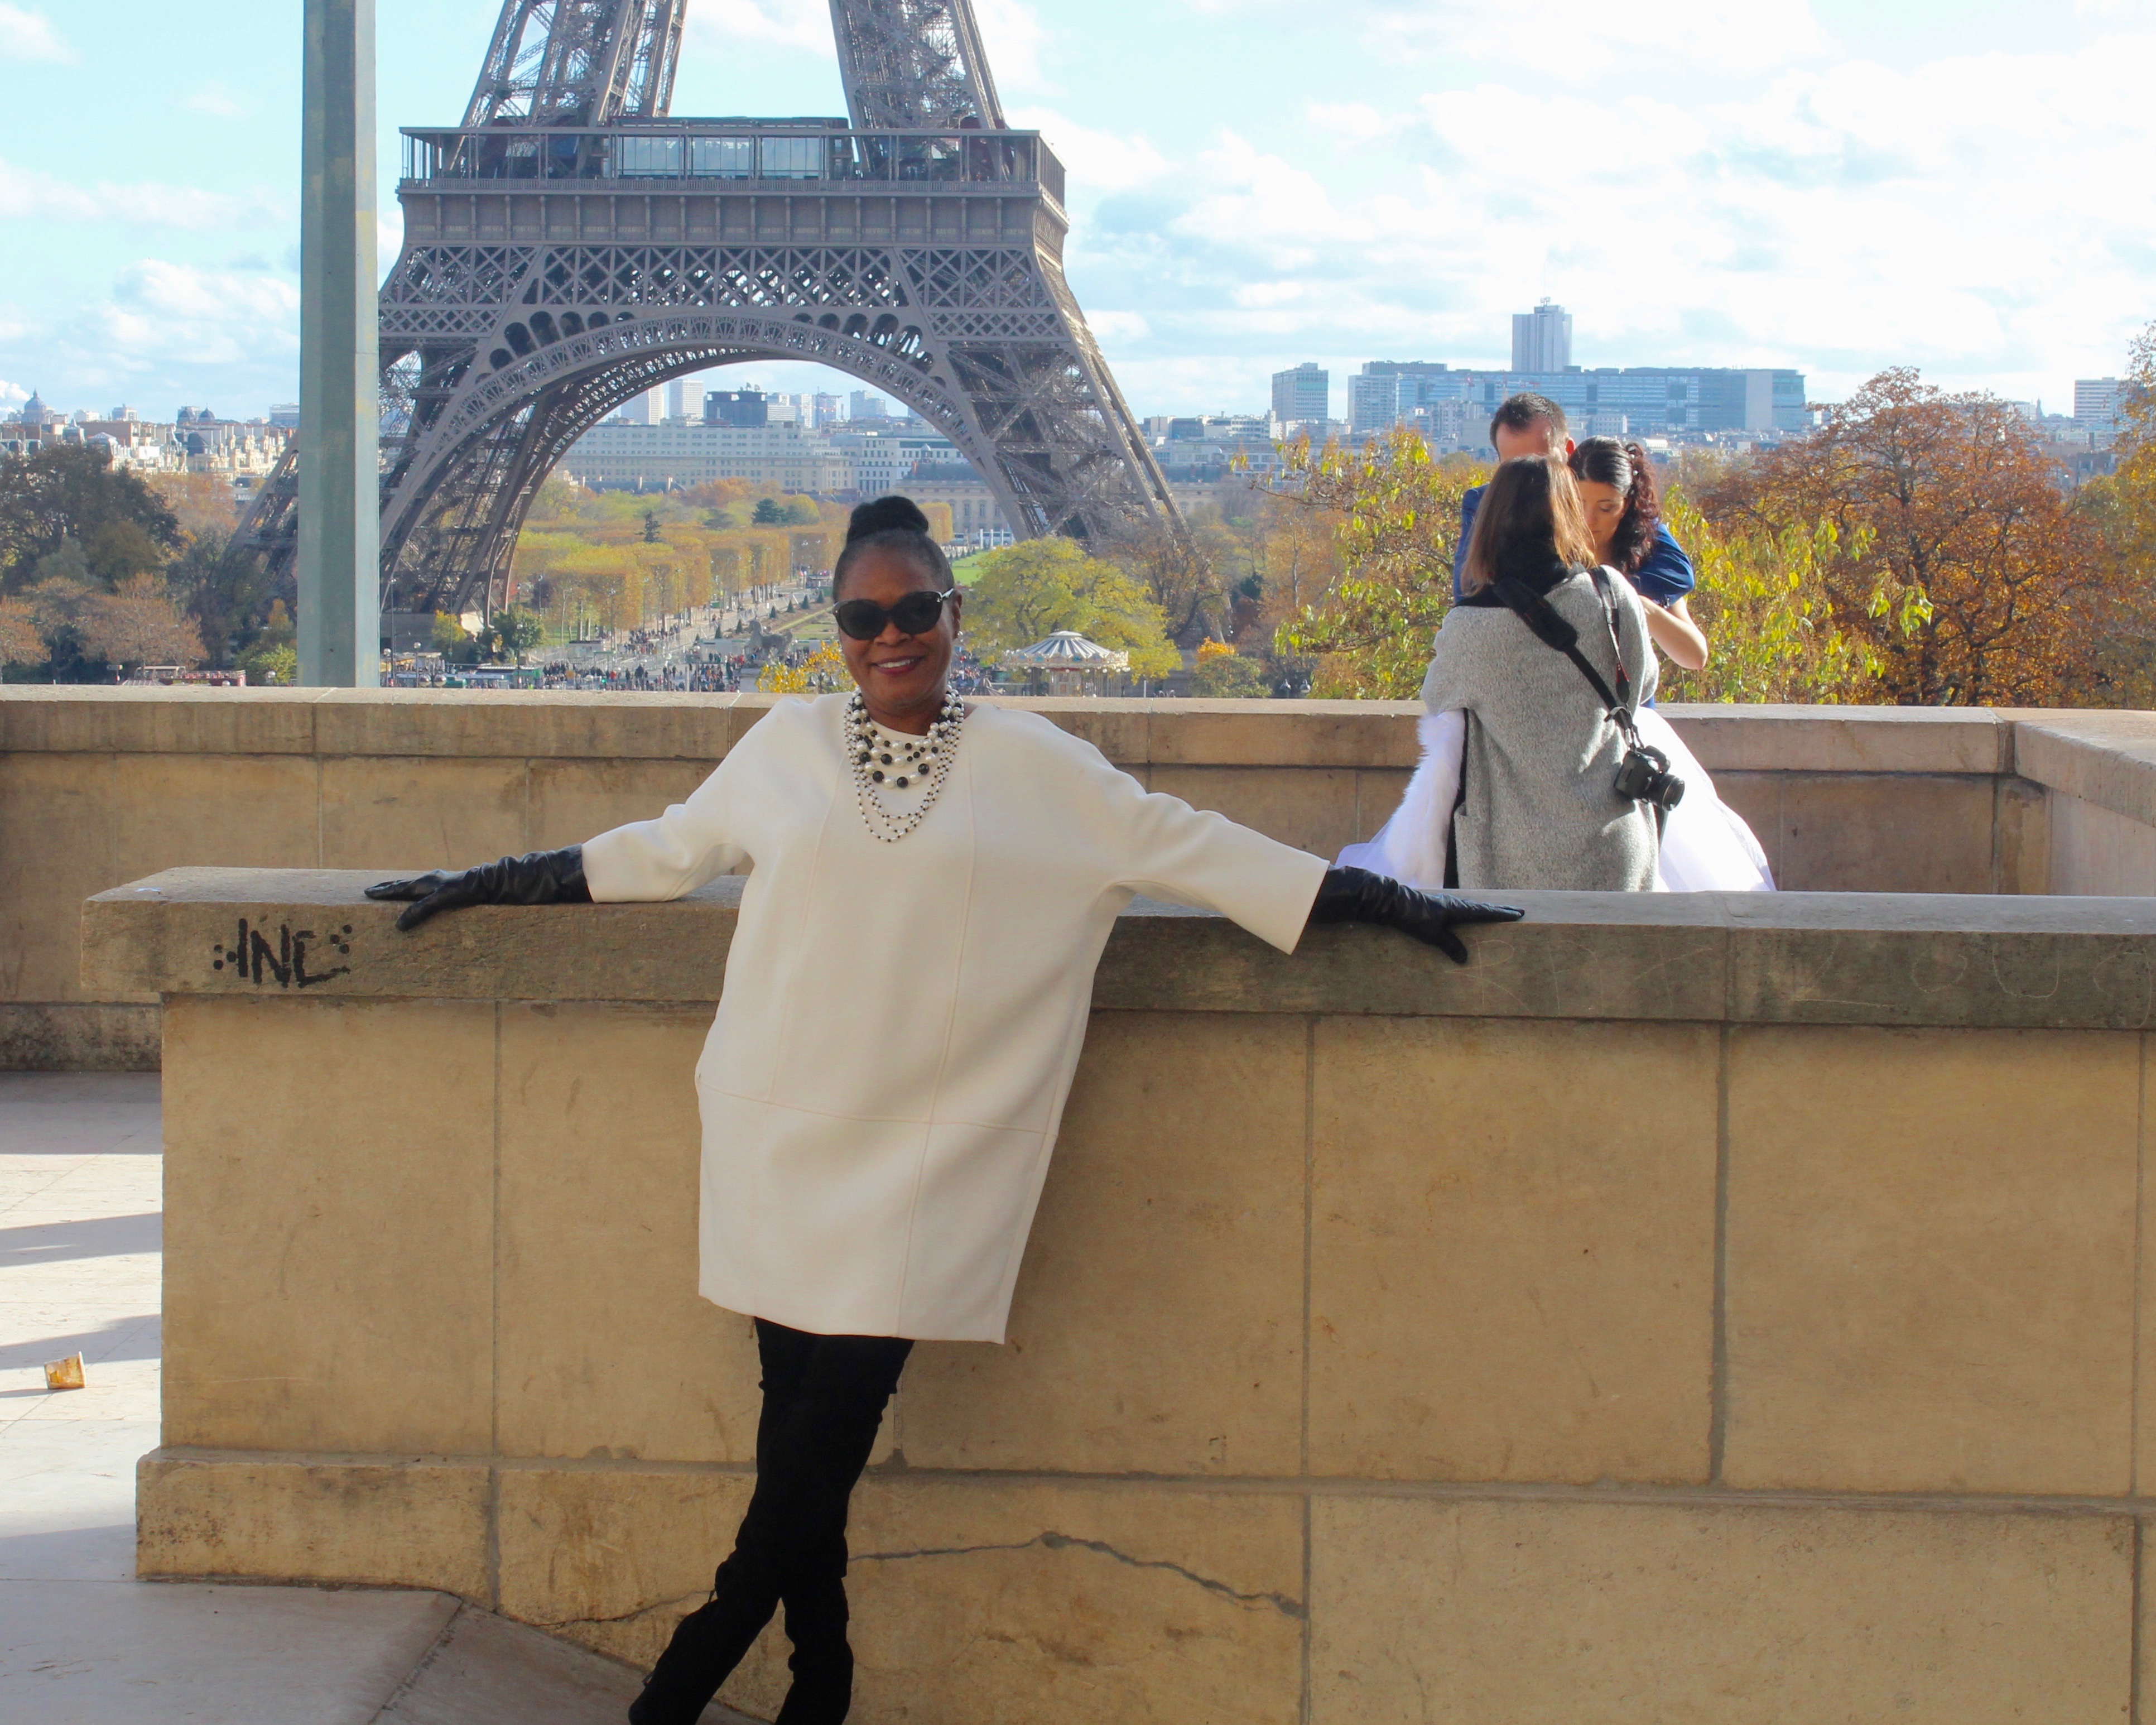 My Paris Trip, "'S Marvelous." Location: Trocadero area near Eiffel Tower. Wearing last year's Banan Republic wool oversized dress, Cole Haan suede black over-the-knee boots with black and white pearls.